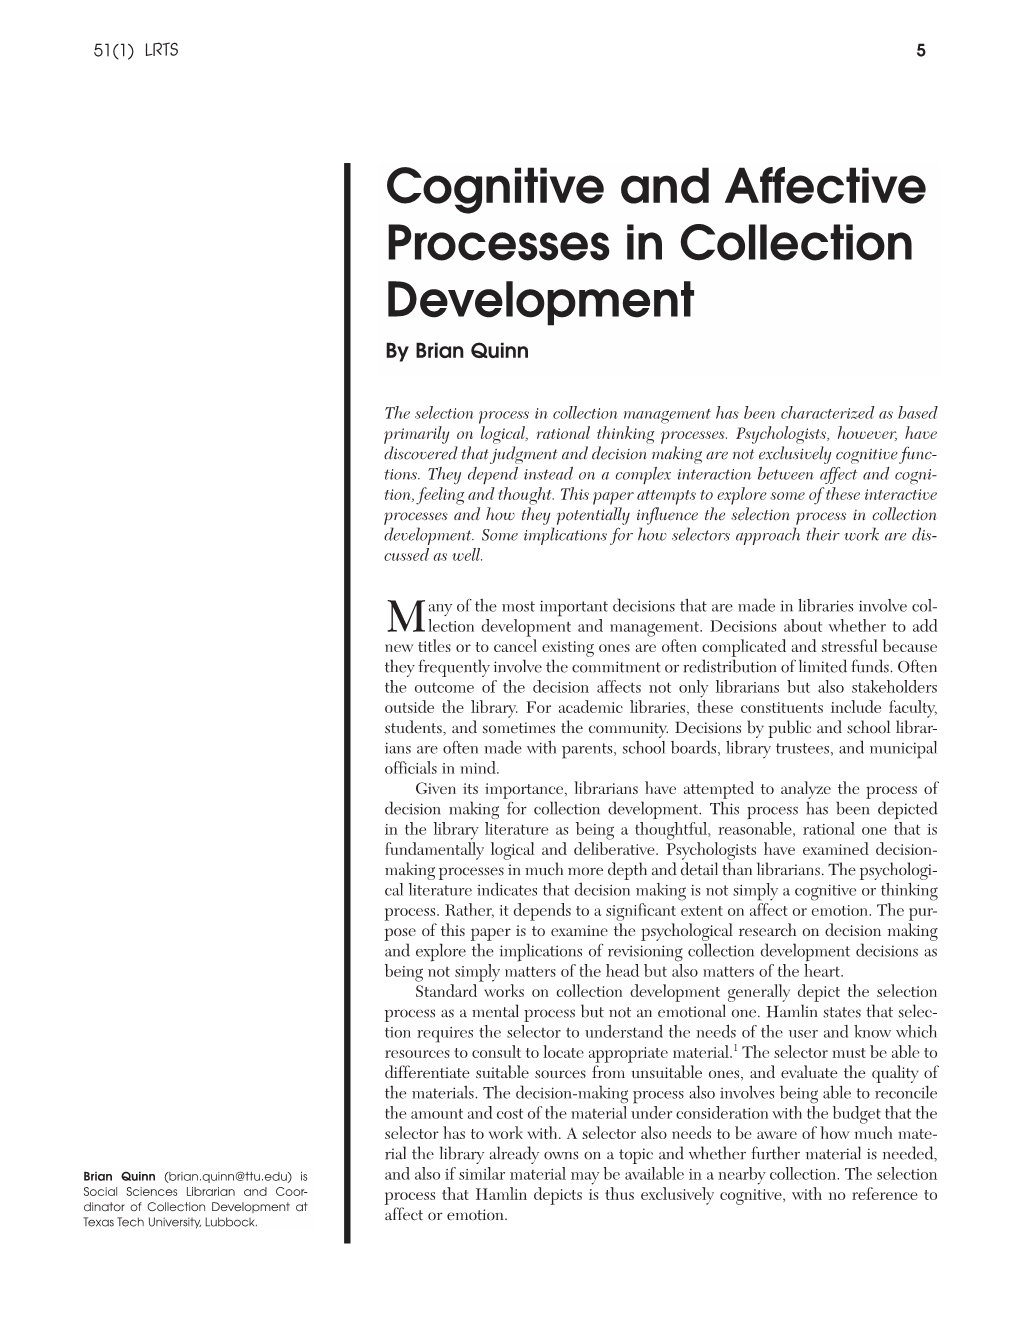 Cognitive and Affective Processes in Collection Development by Brian Quinn